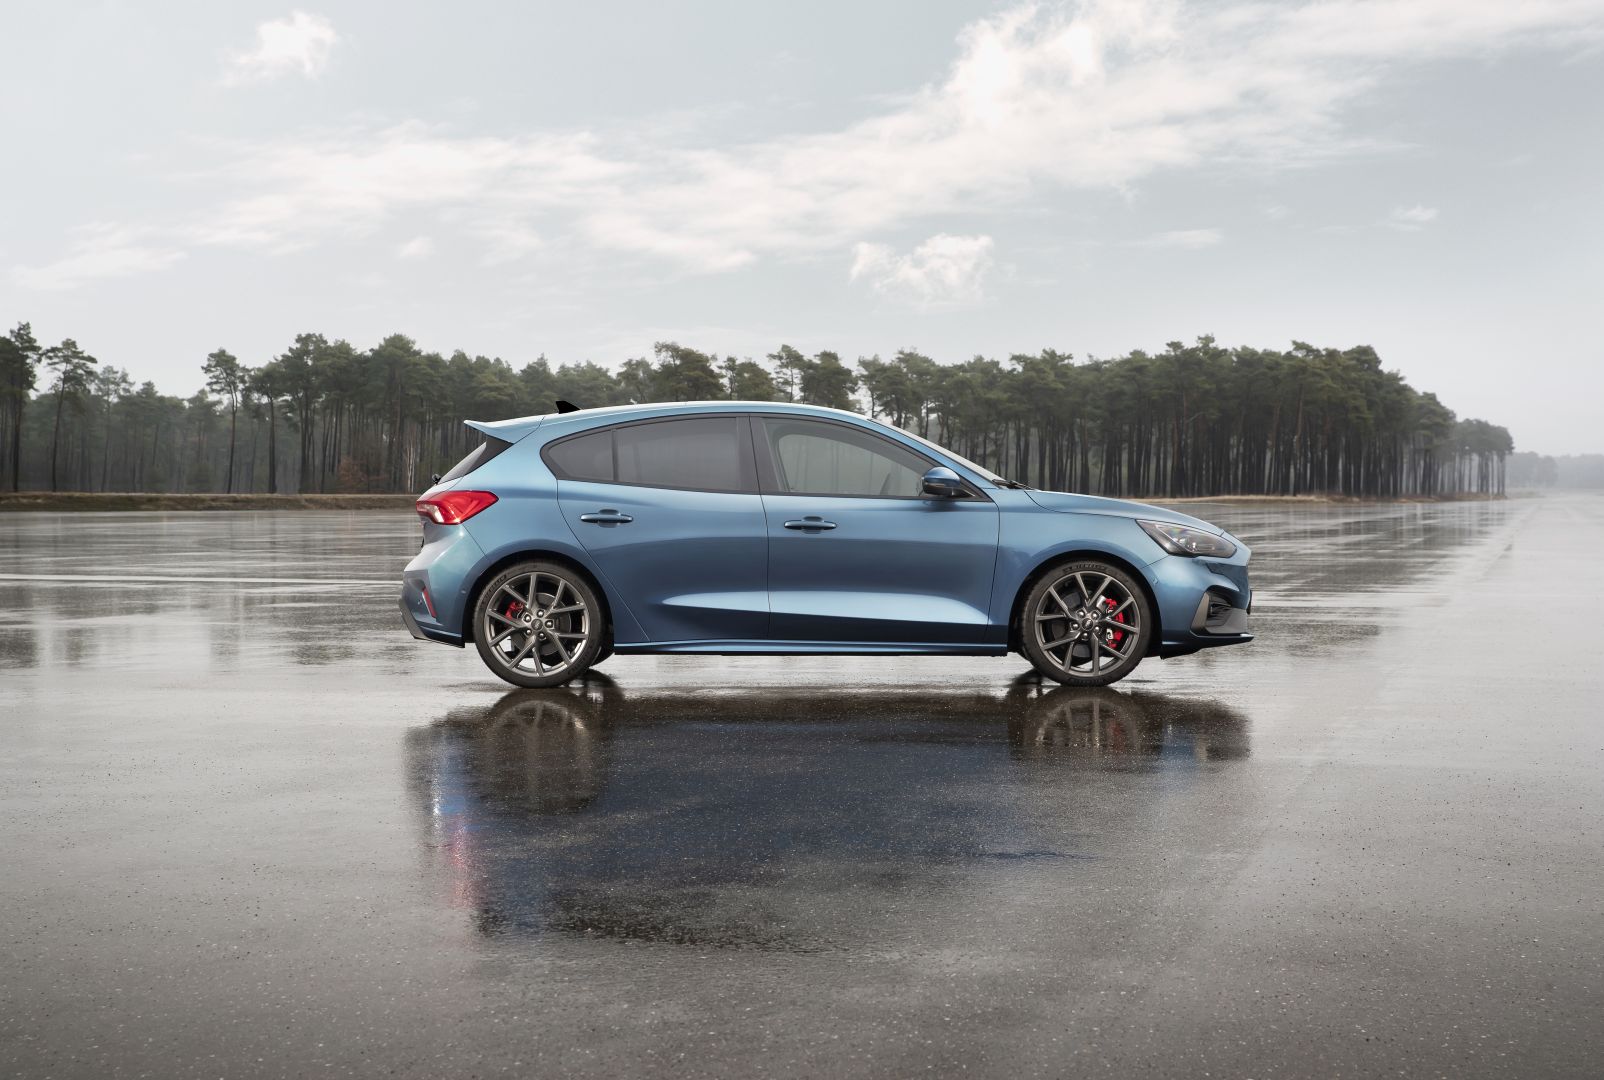 2019 Ford Focus ST Mk4 debuts - 276 hp and 430 Nm 2.3 litre turbo, 6-sp  manual or 7-sp auto transmissions 